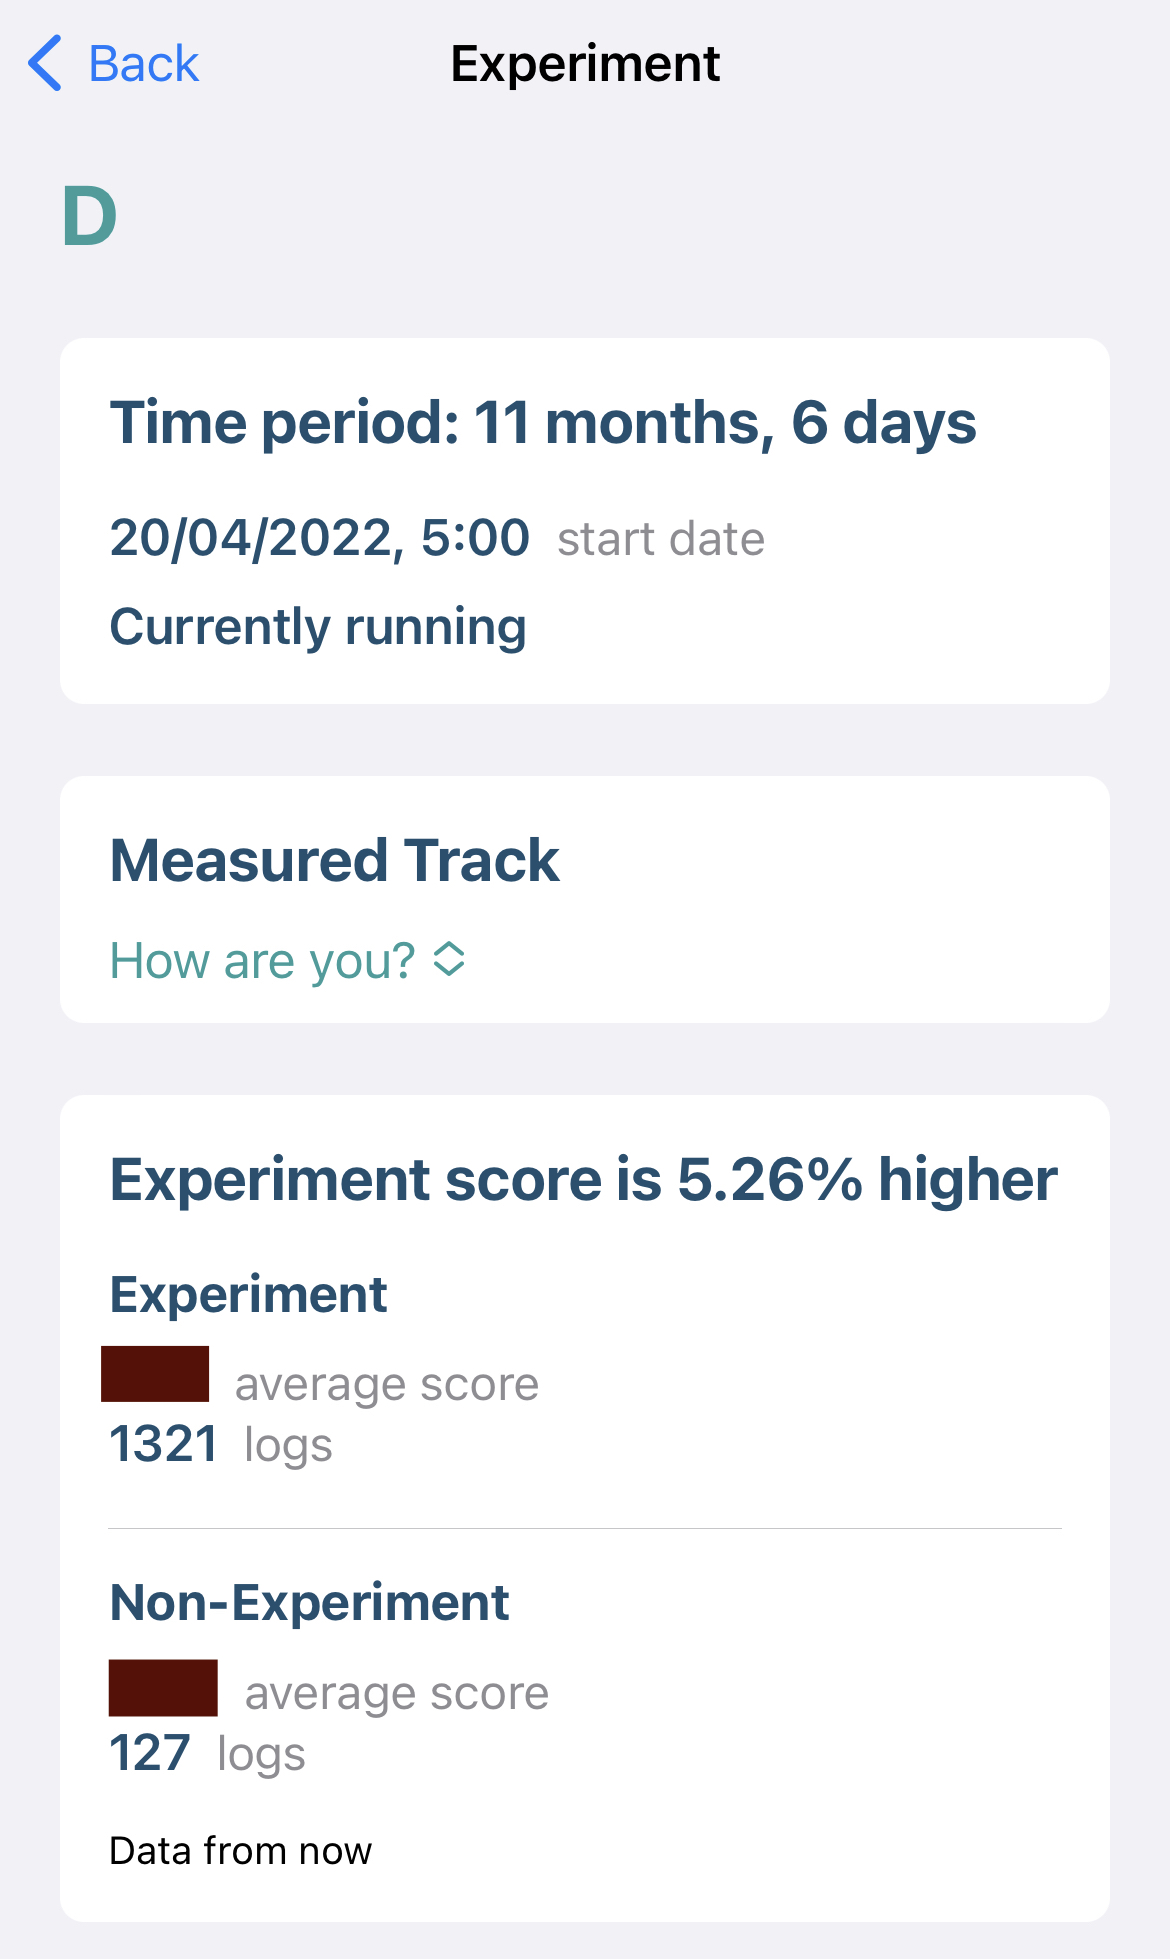 Experiment data and effects on tracking screenshot example- vitamin D effects on 'How are you' tracking